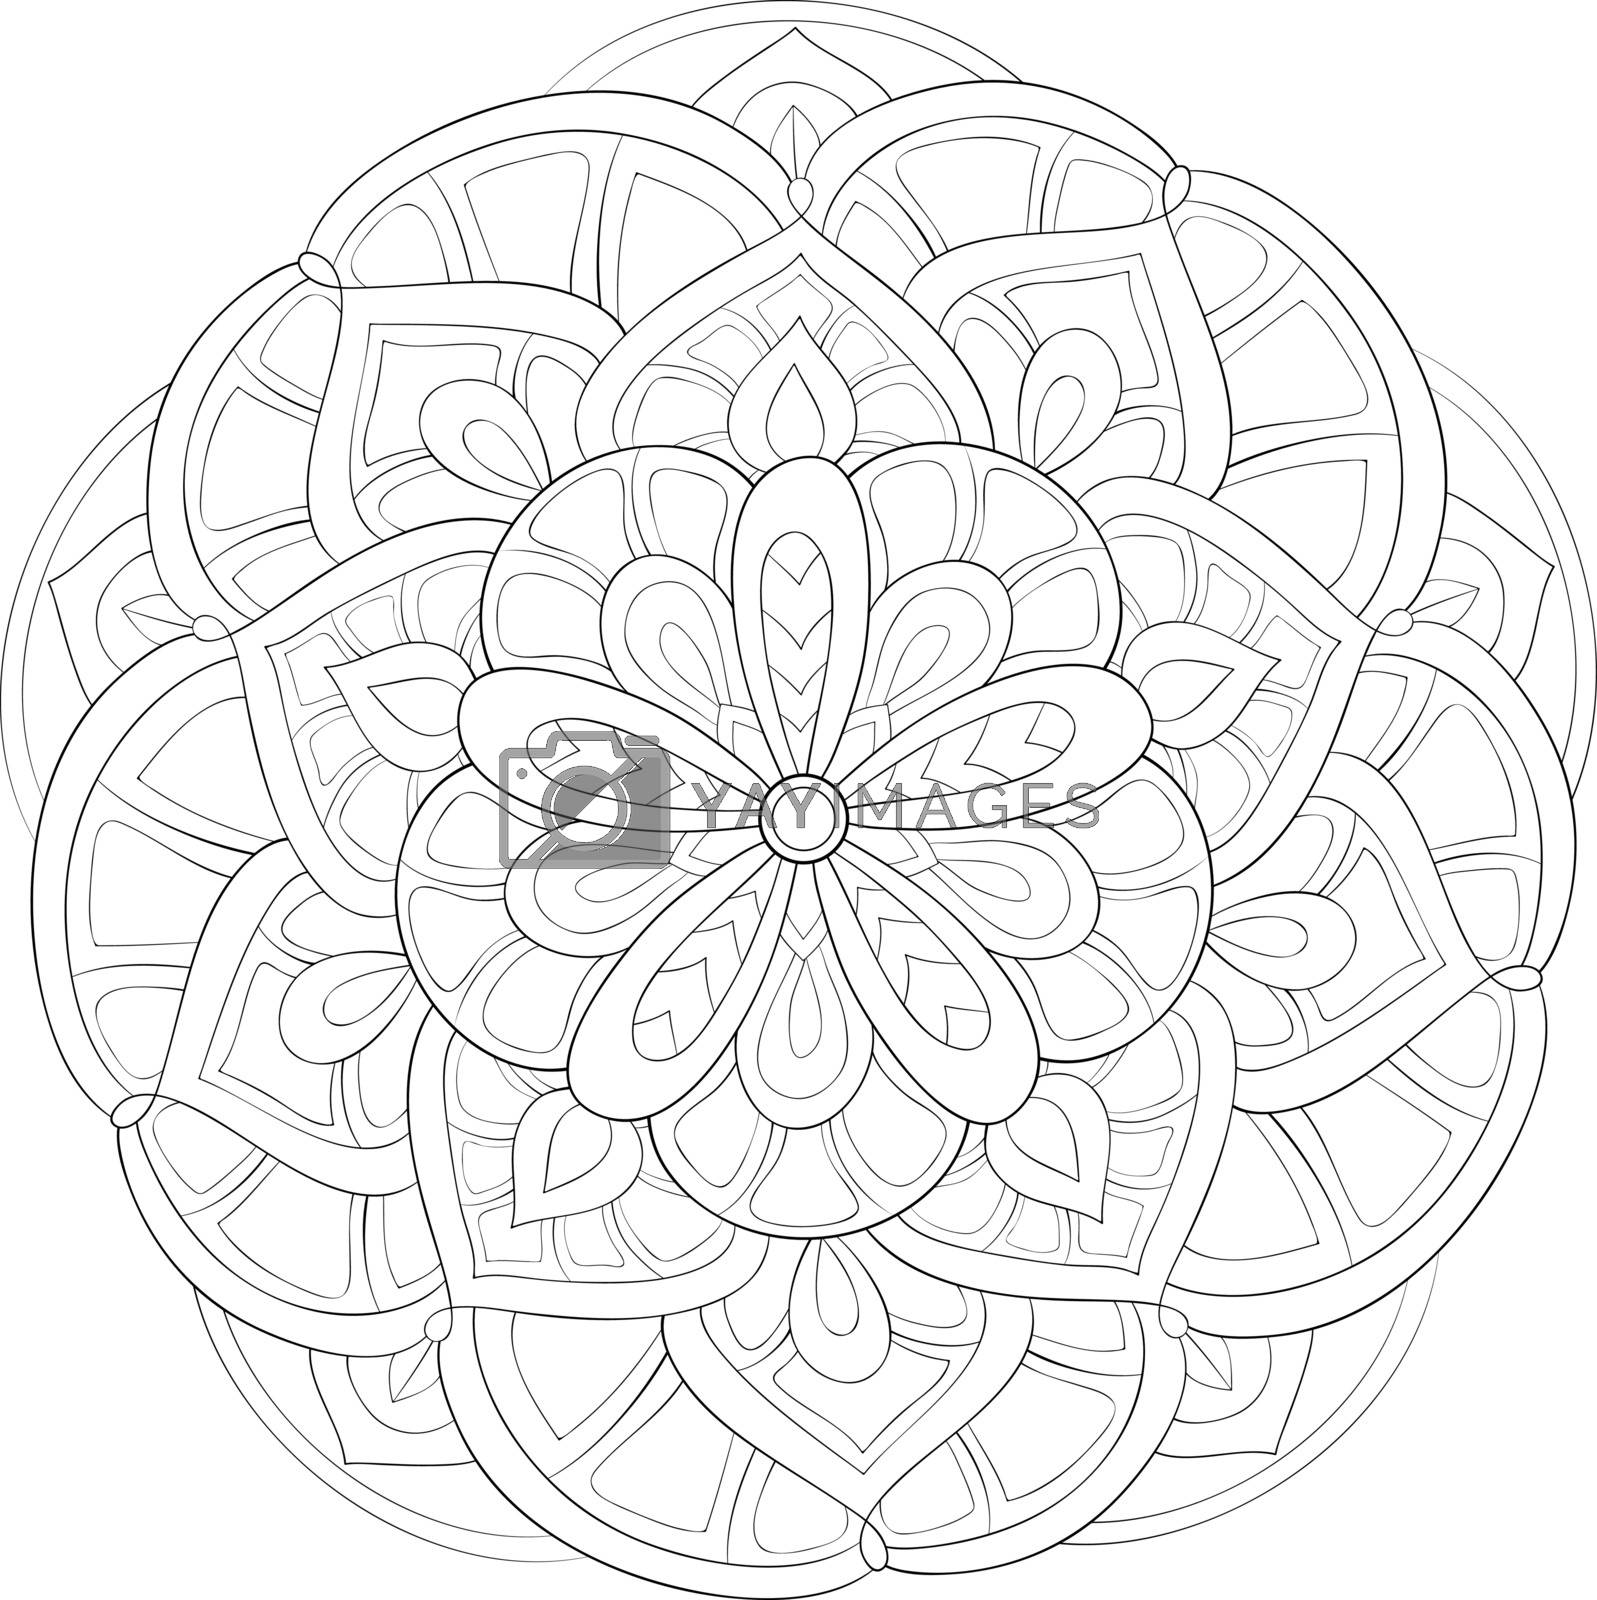 Royalty free image of Adult coloring book,page a zen mandala image for relaxing.Line a by nonuzza